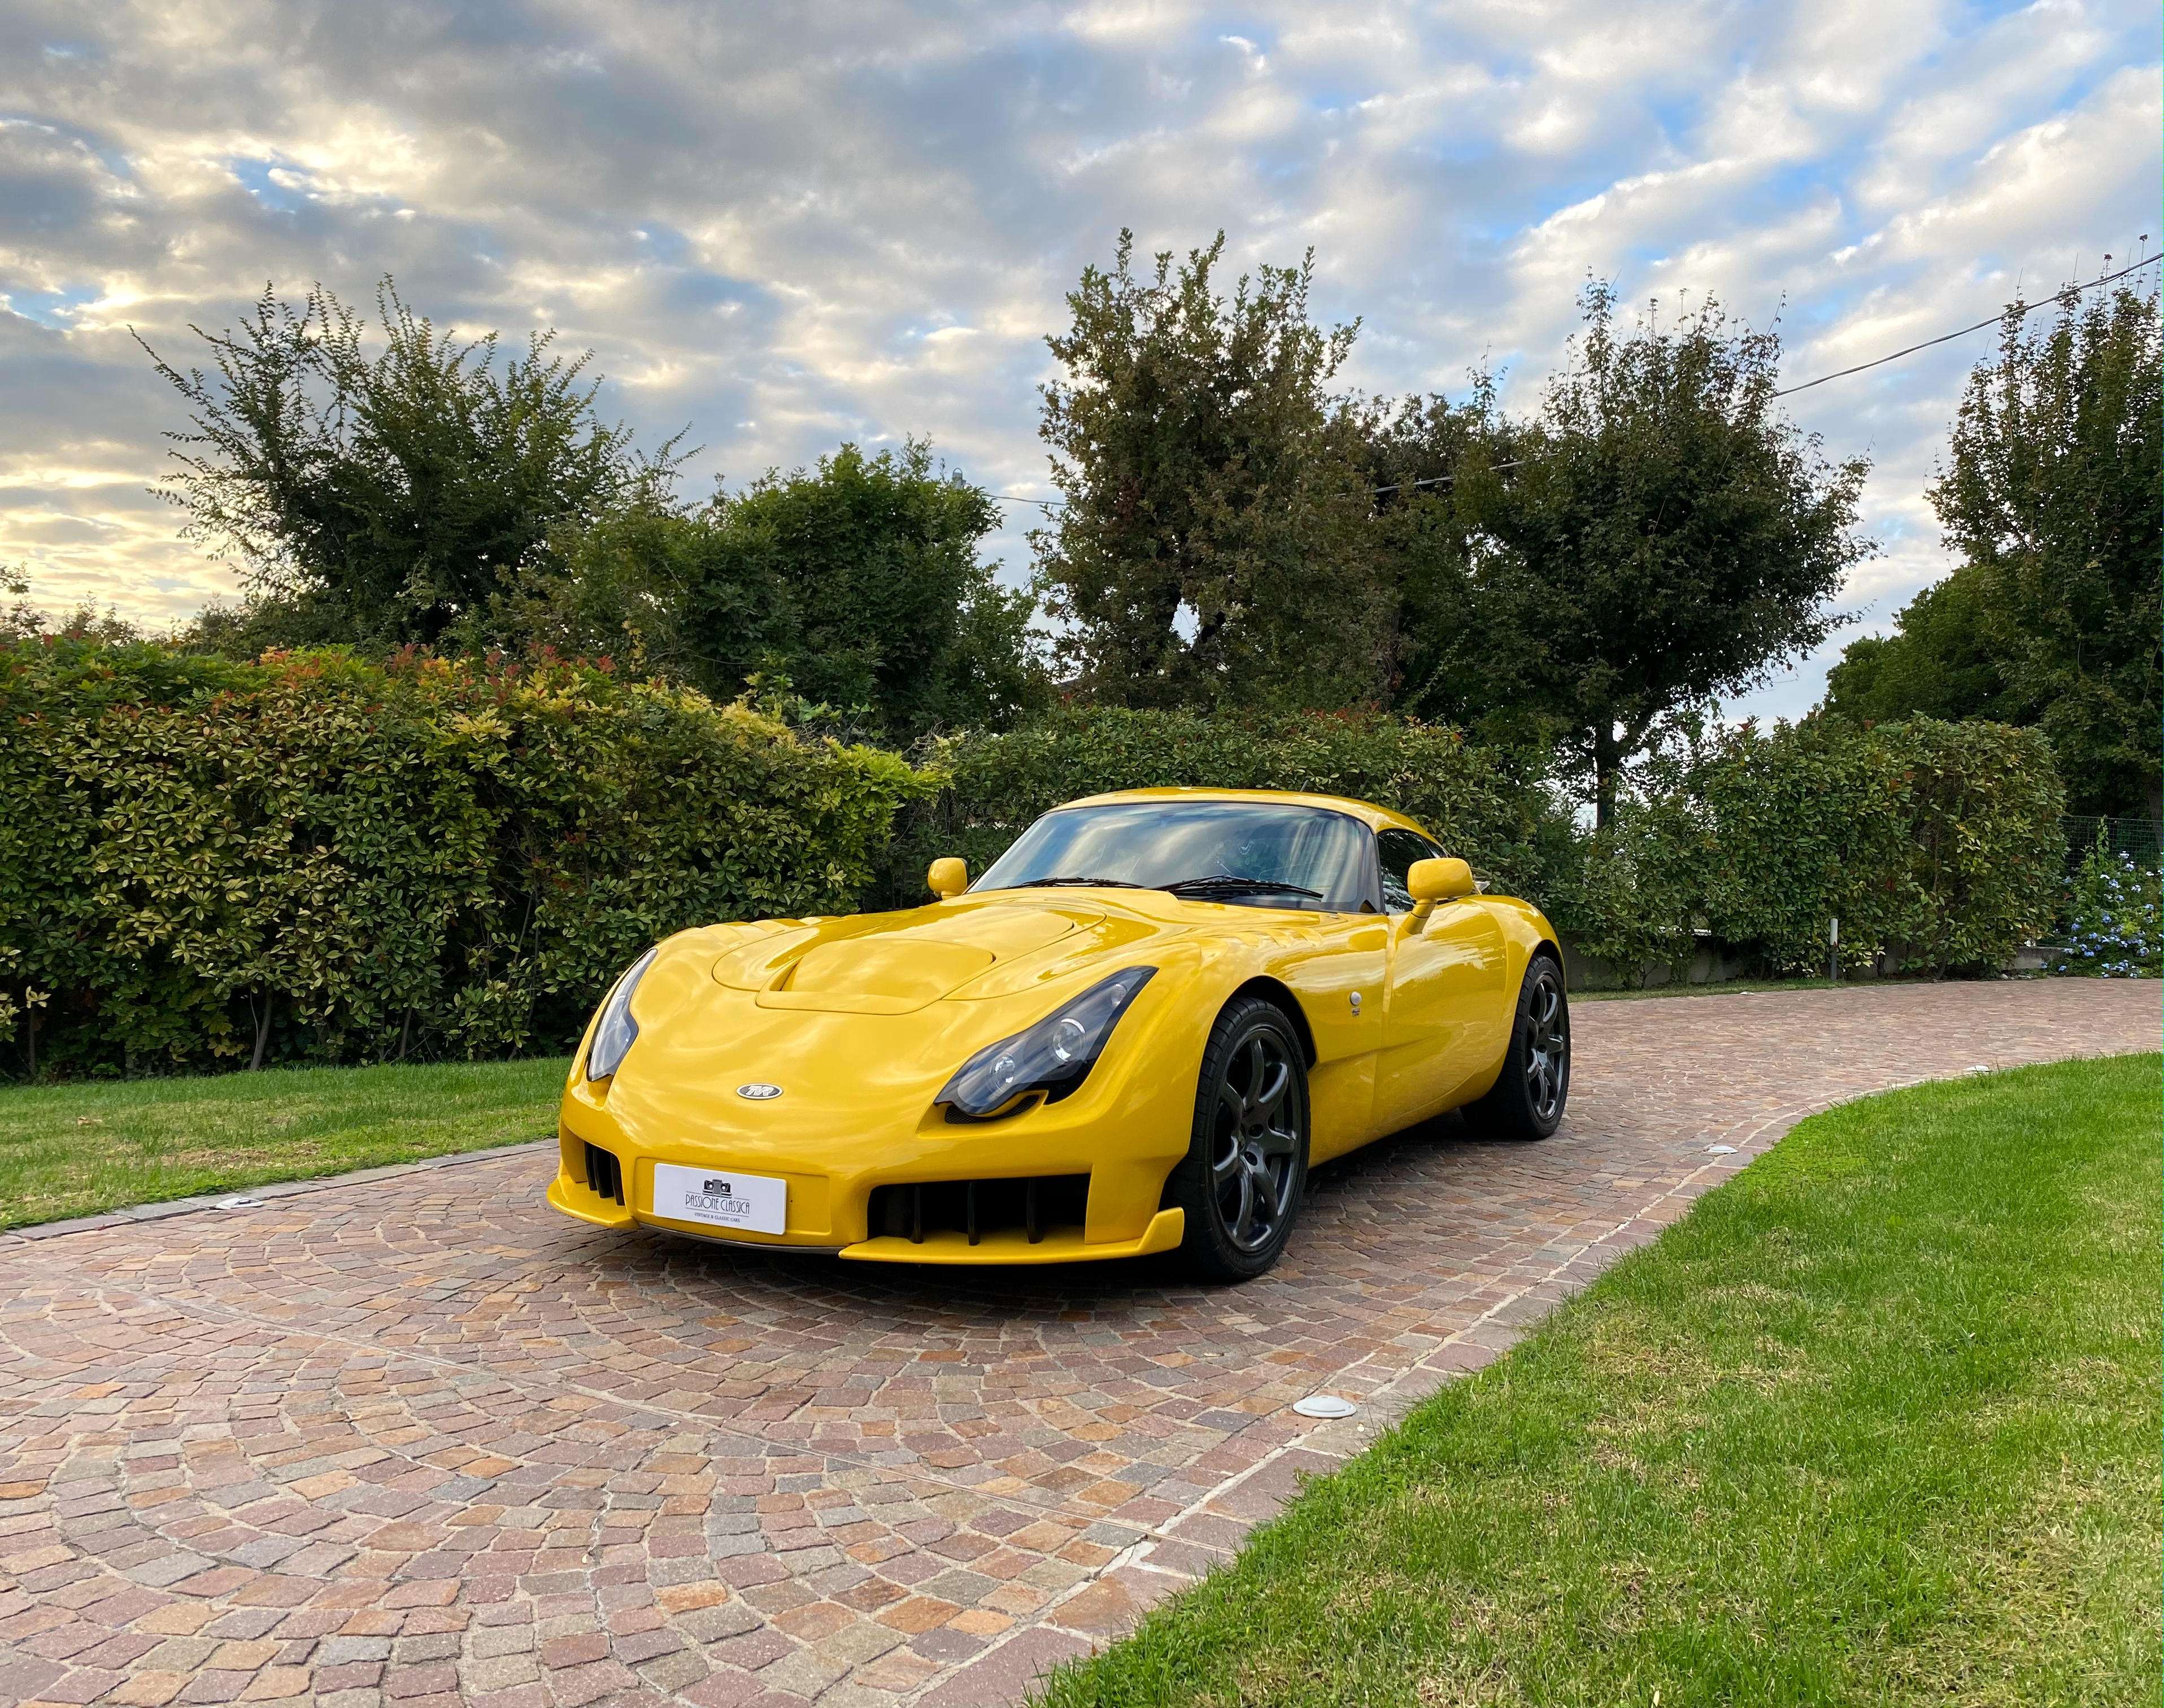 TVR Sagaris Coupe in Yellow used in longare for € 95,000.-